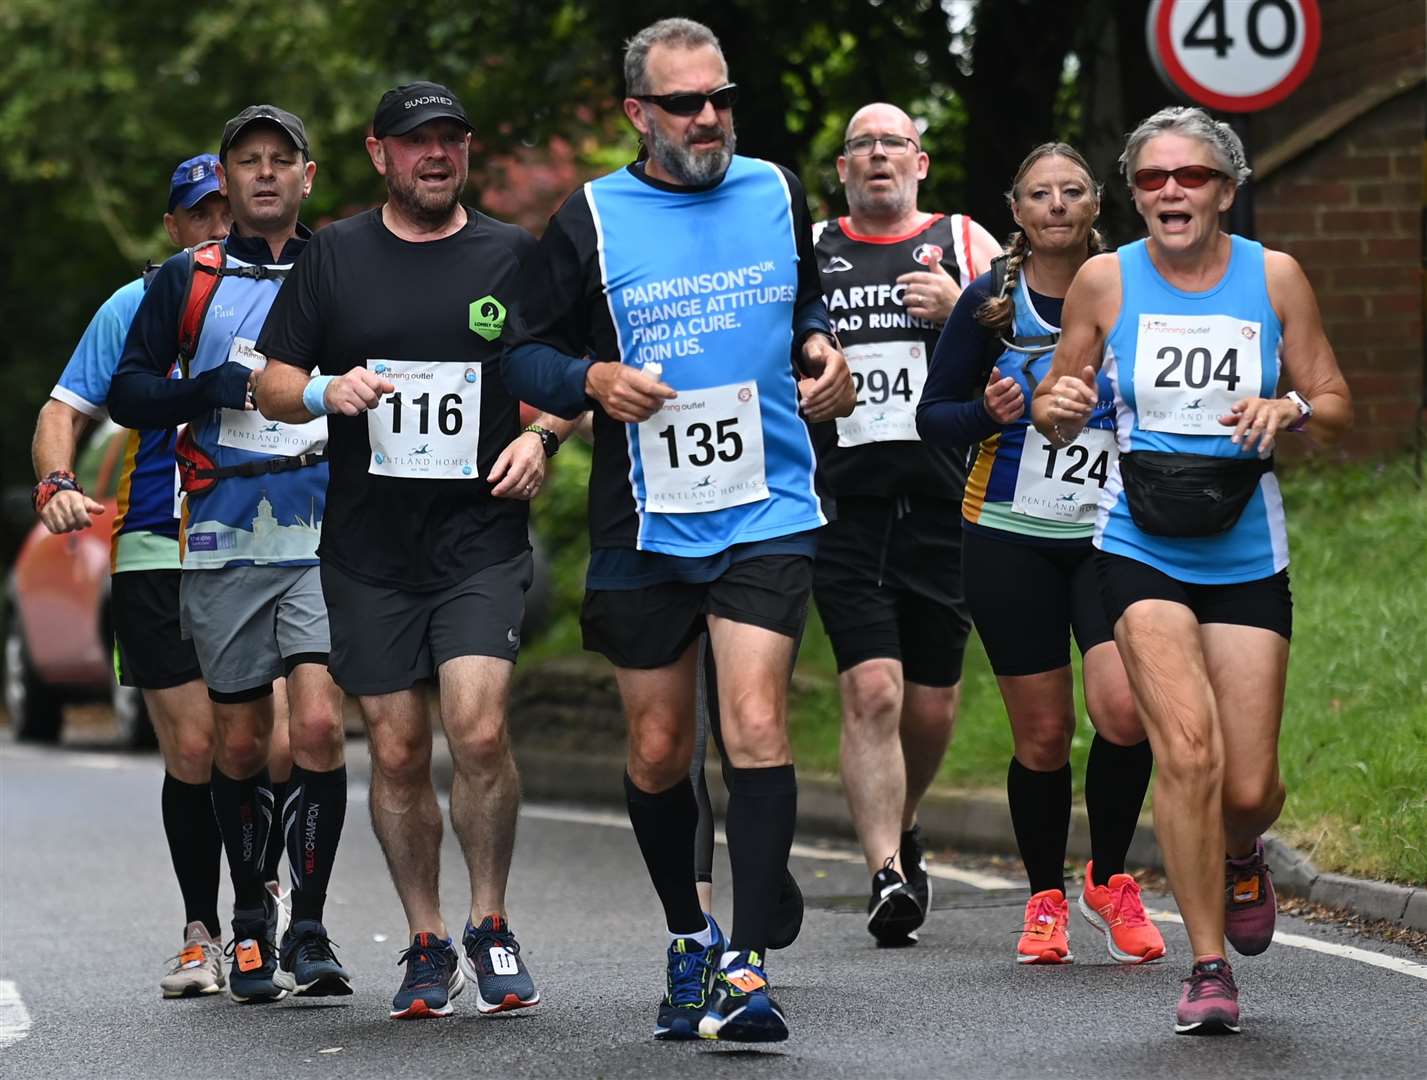 Gary Edwards (135) leads this group of runners. Picture: Barry Goodwin (49789807)